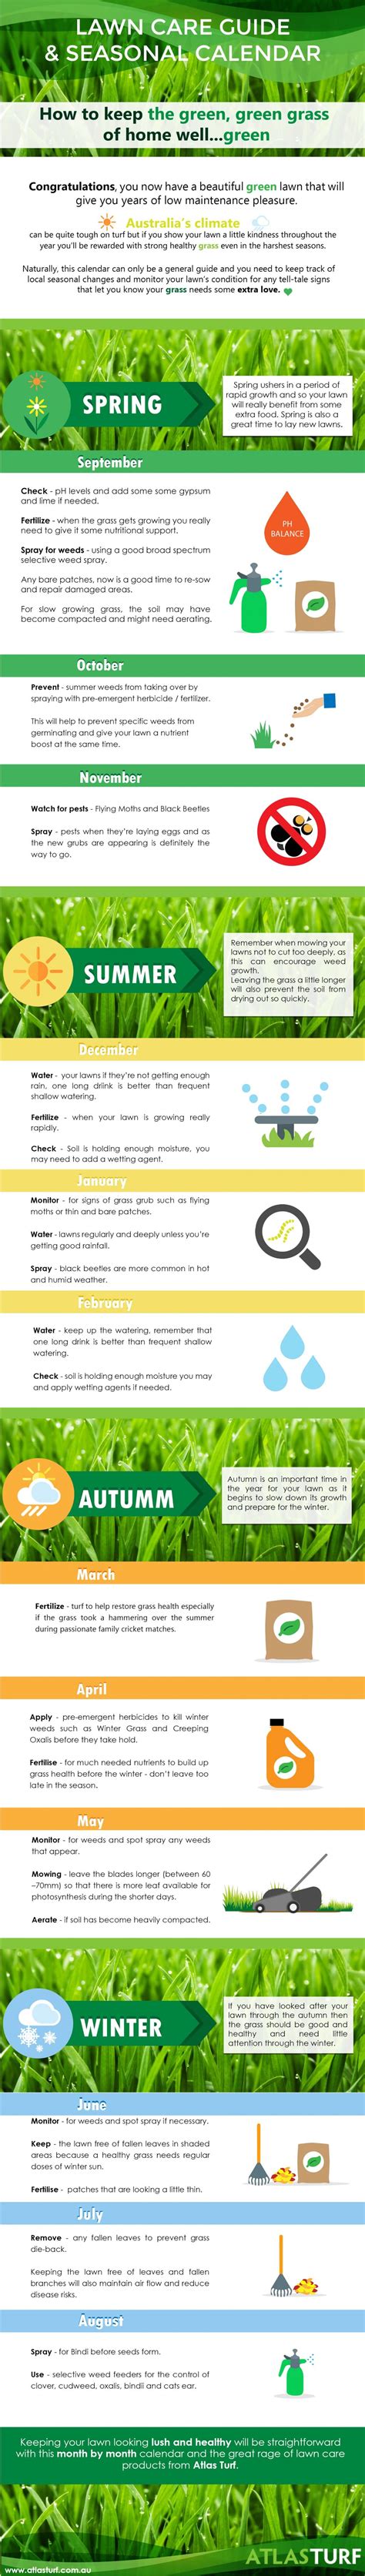 The Ultimate Lawn Care Calendar With Seasonal Tips And Advice For The